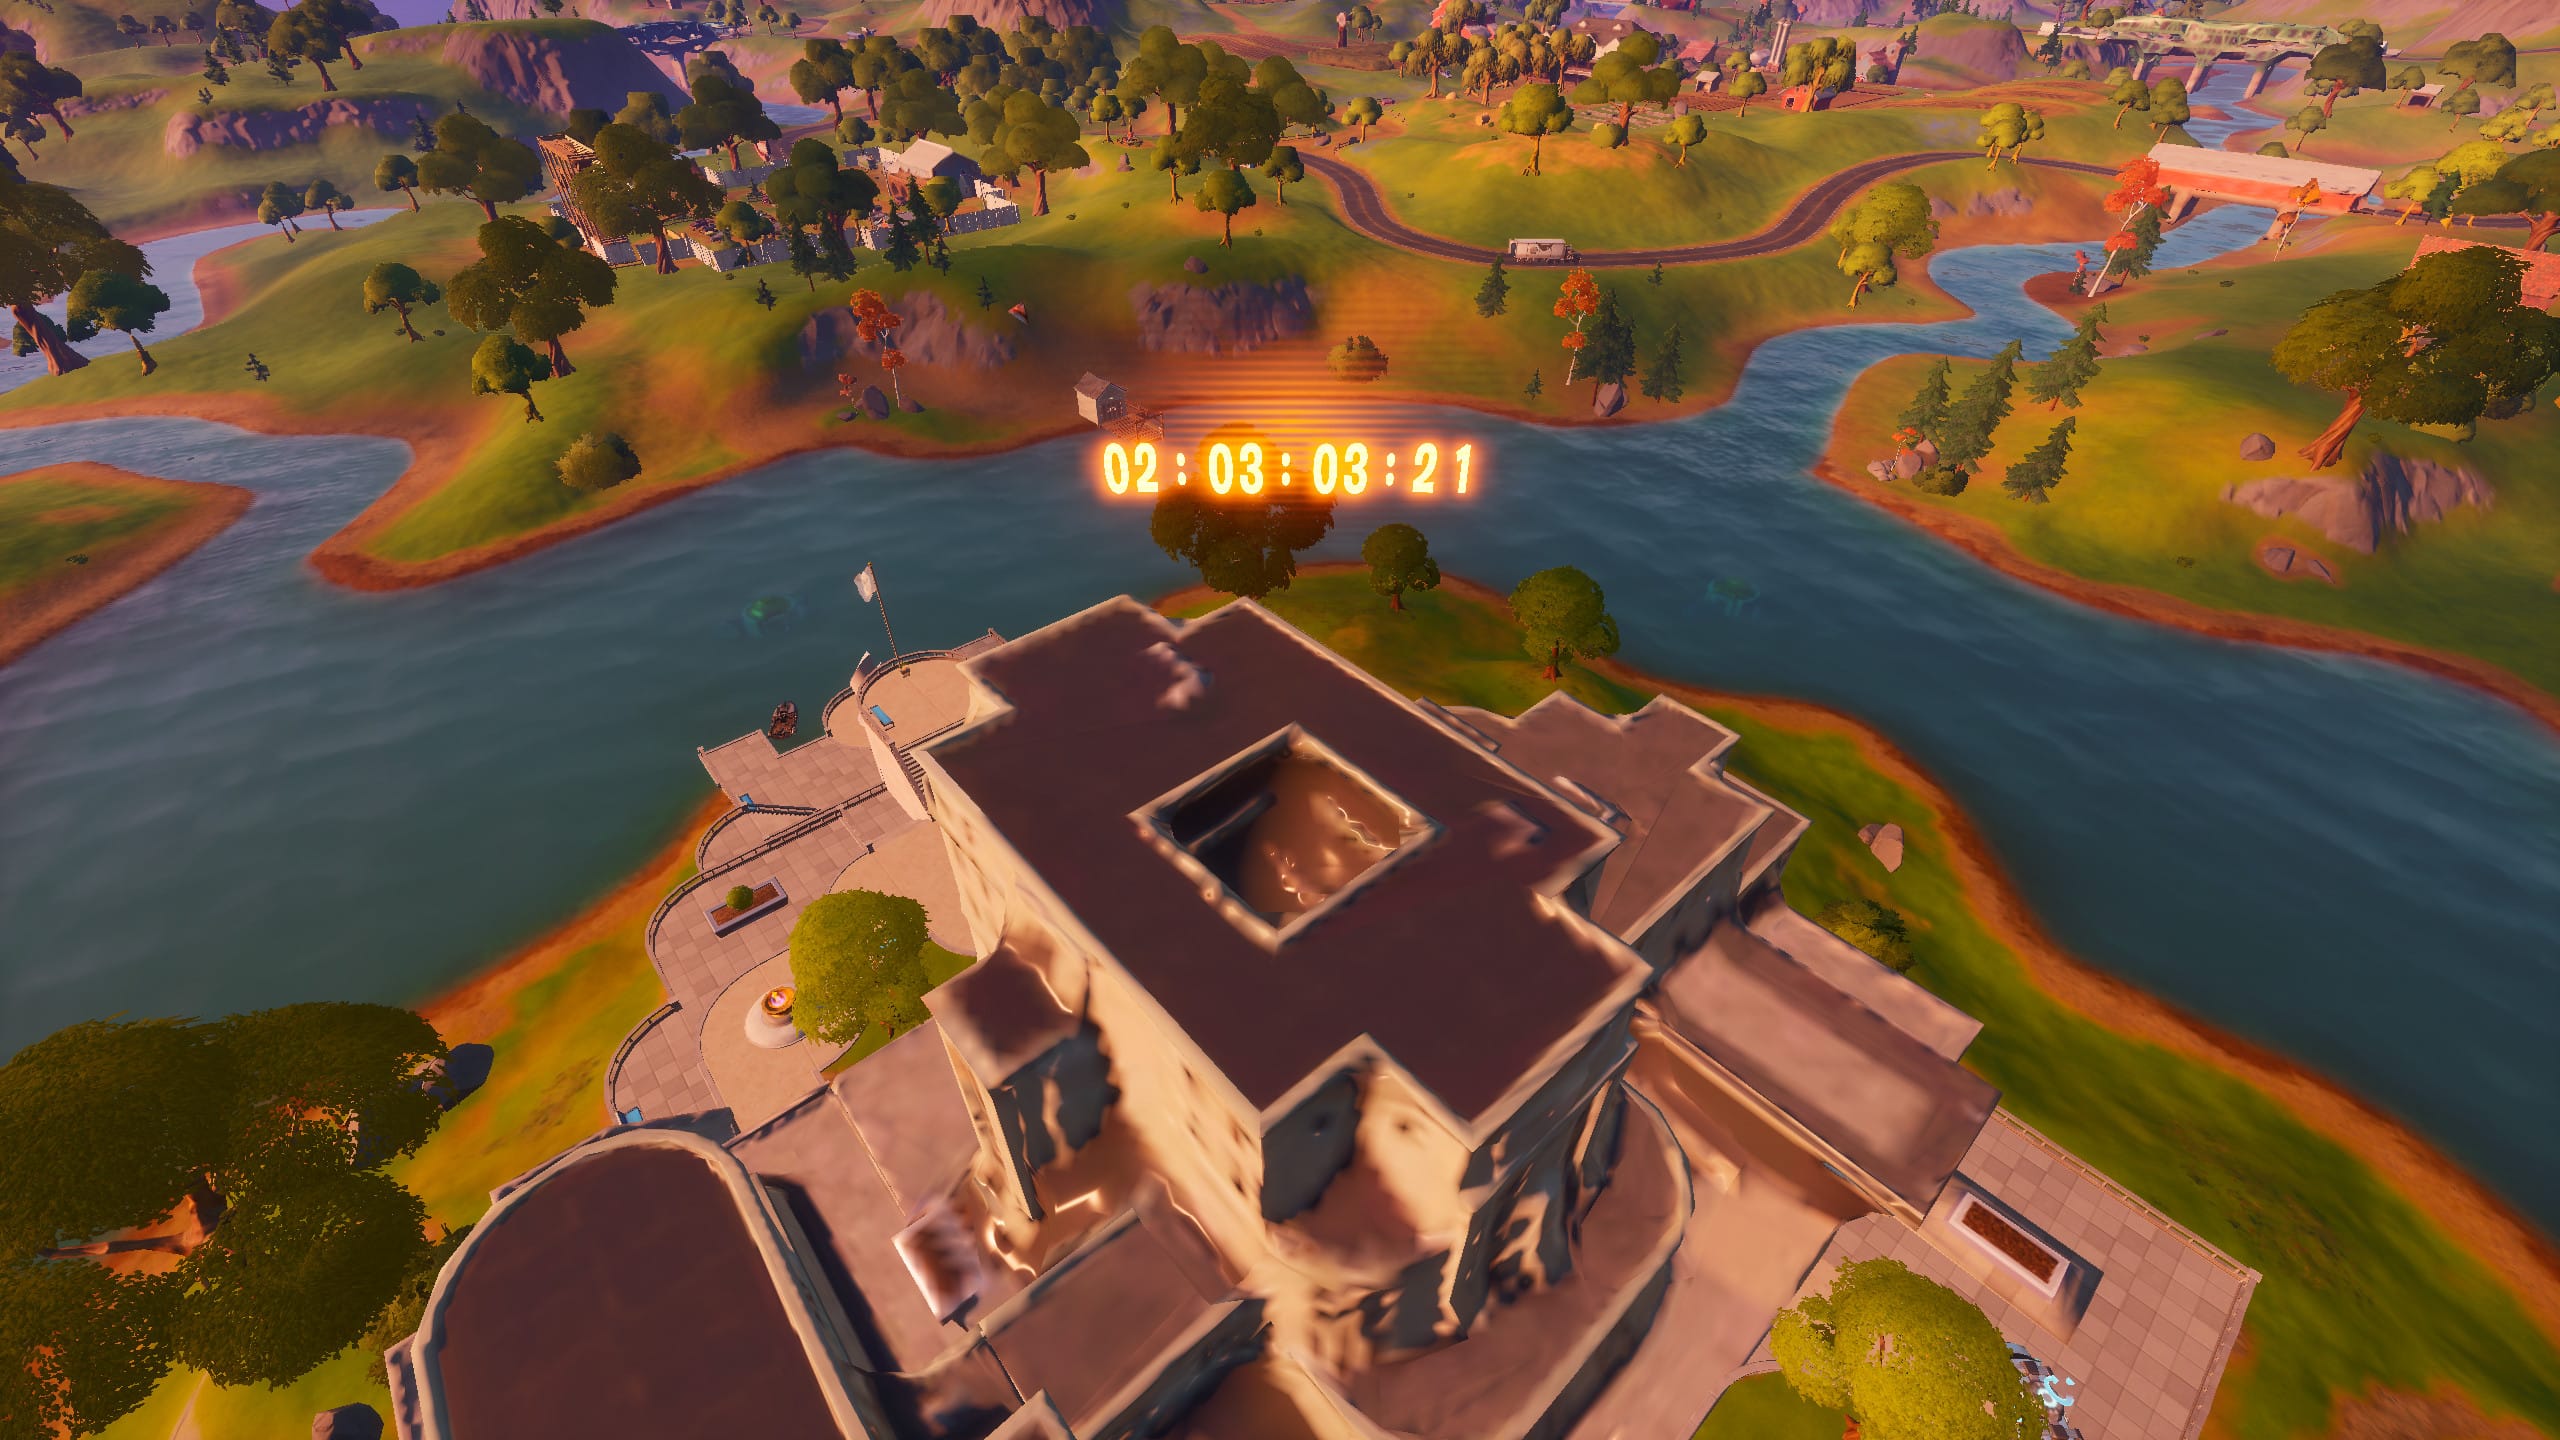 Fortnite Live Event Countdown Appeared Above The Agency